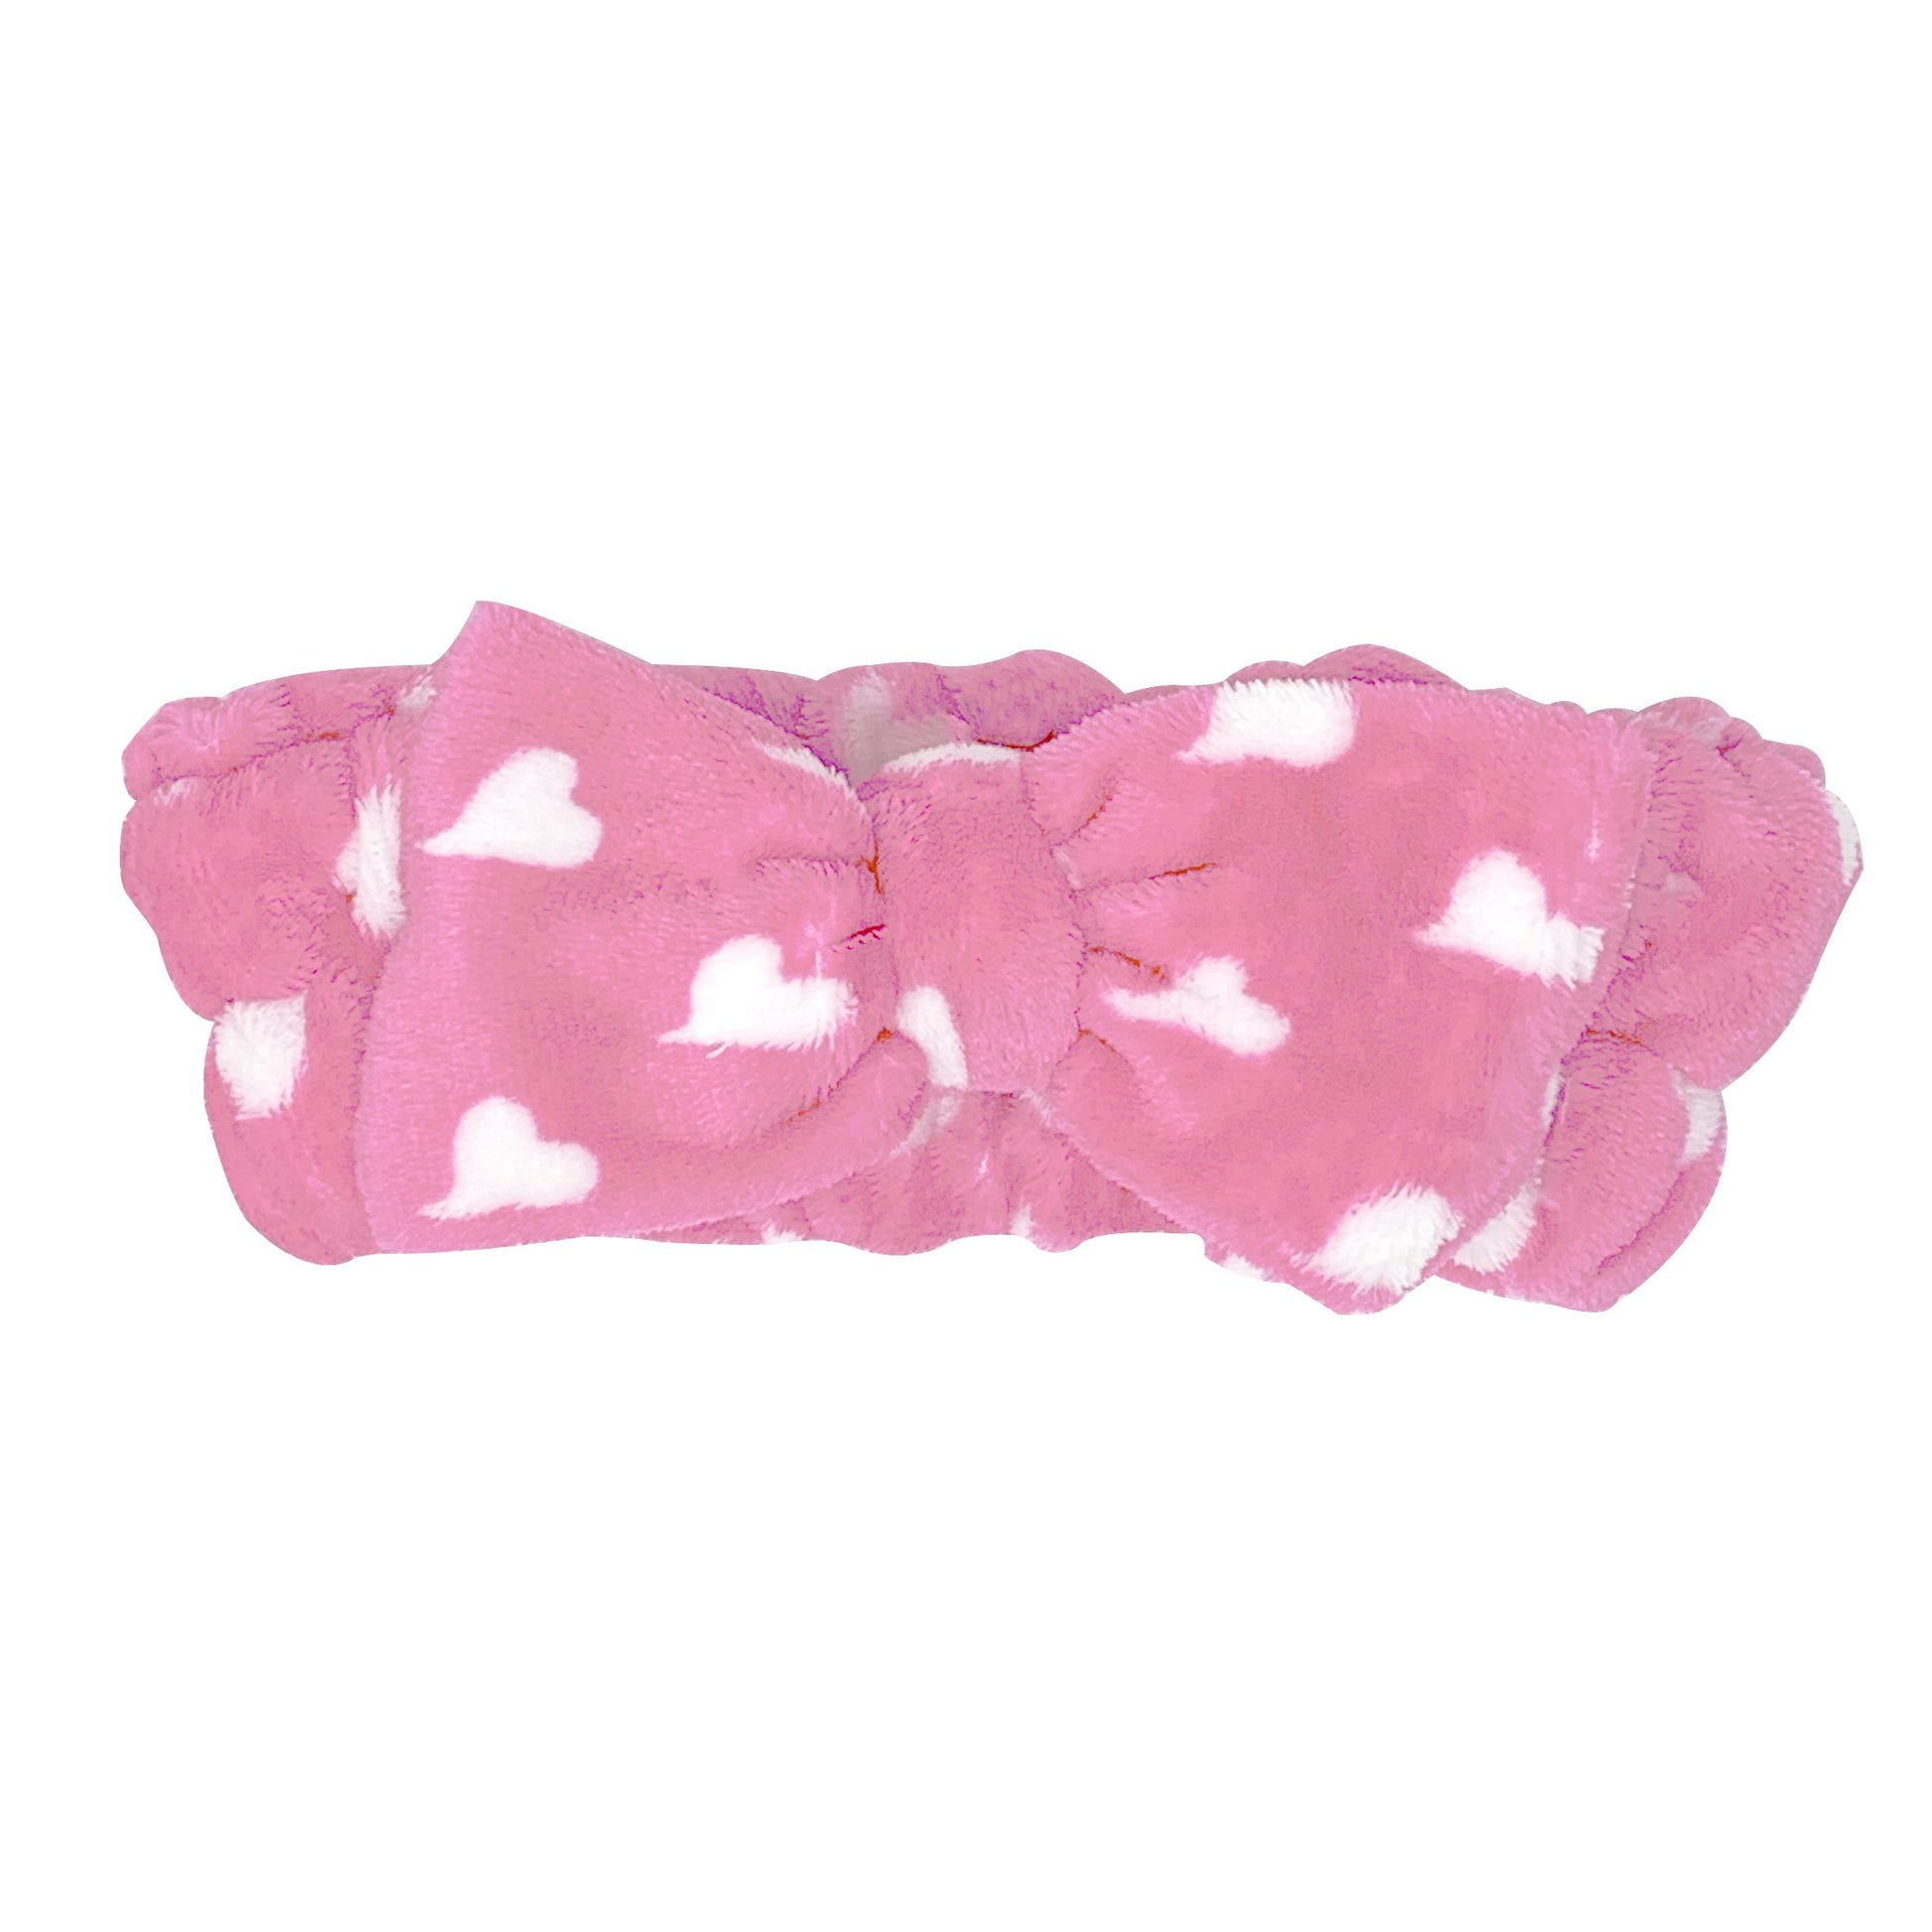 Hot Pink Teddy Headyband with White Hearts - The Crème Shop